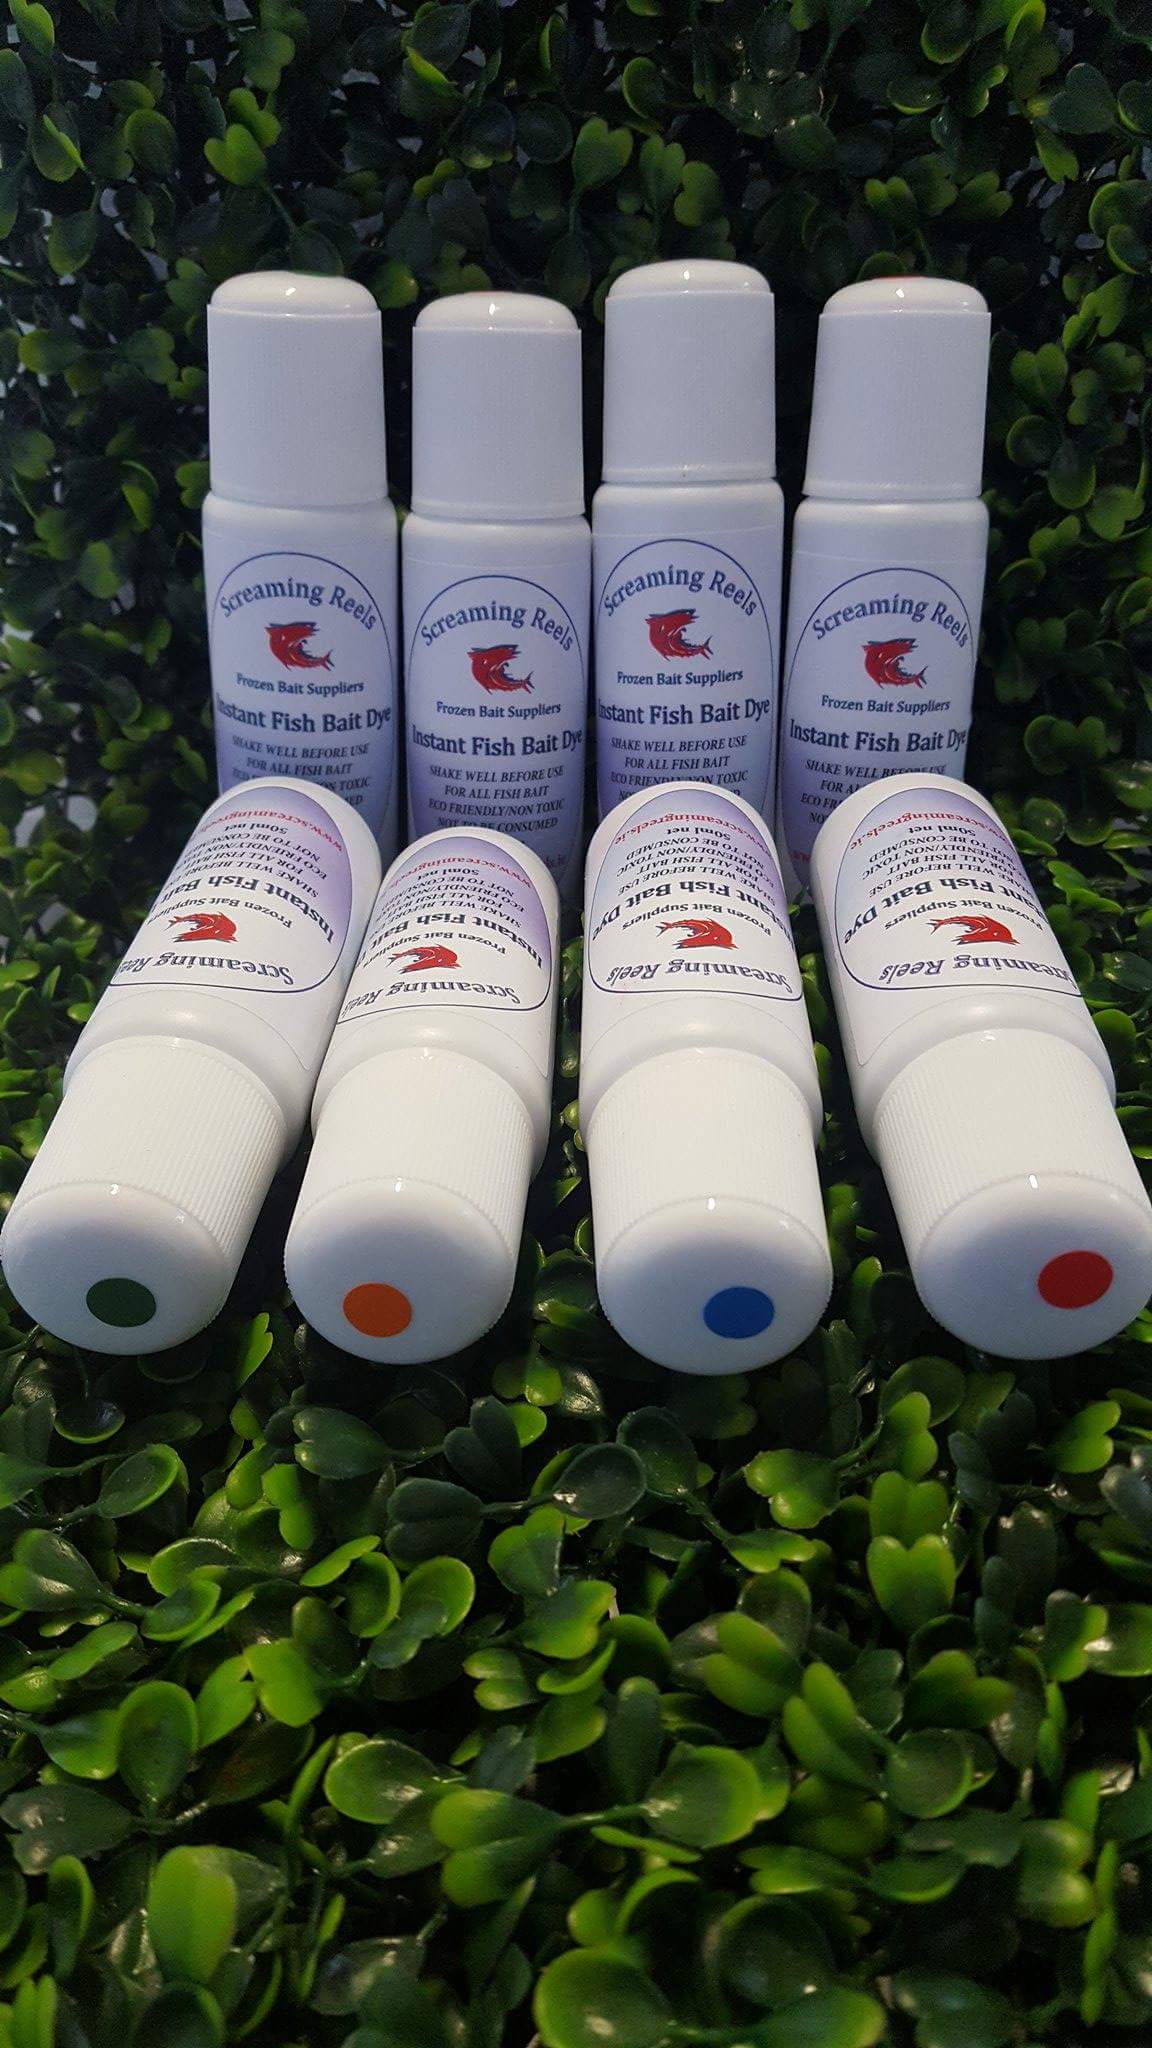 Instant Bait Dyes. Eco friendly one 50ml bottle can dye up to 80 fish.